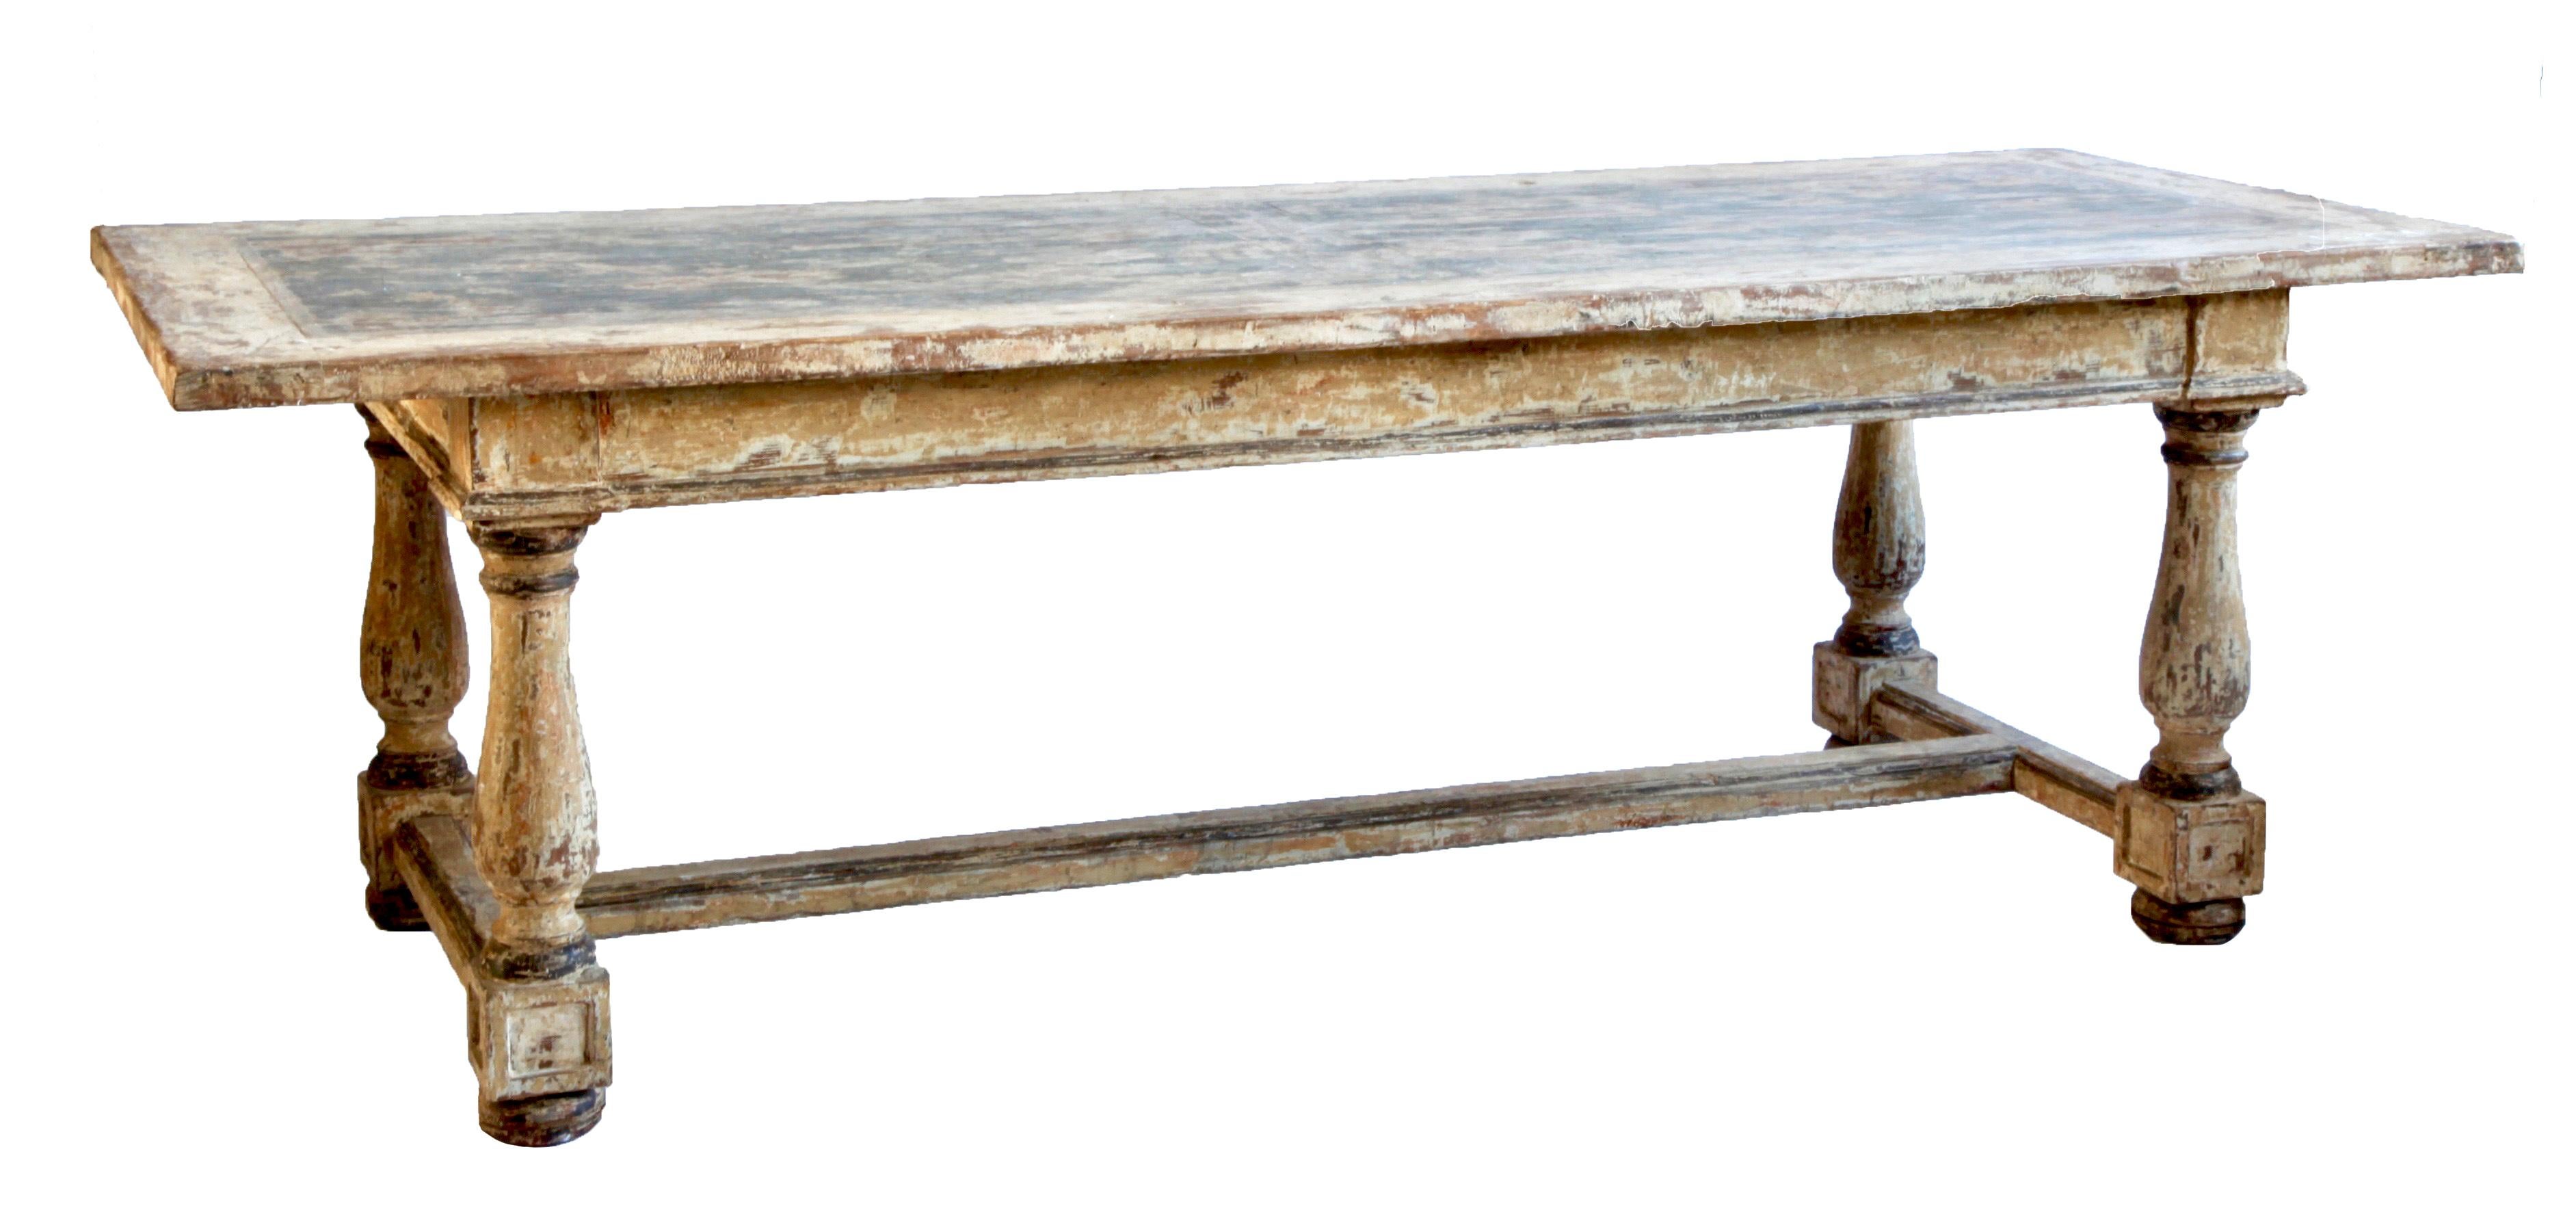 Hand-Painted 18th Century Italian Farmhouse Table With Bold Textural Finish